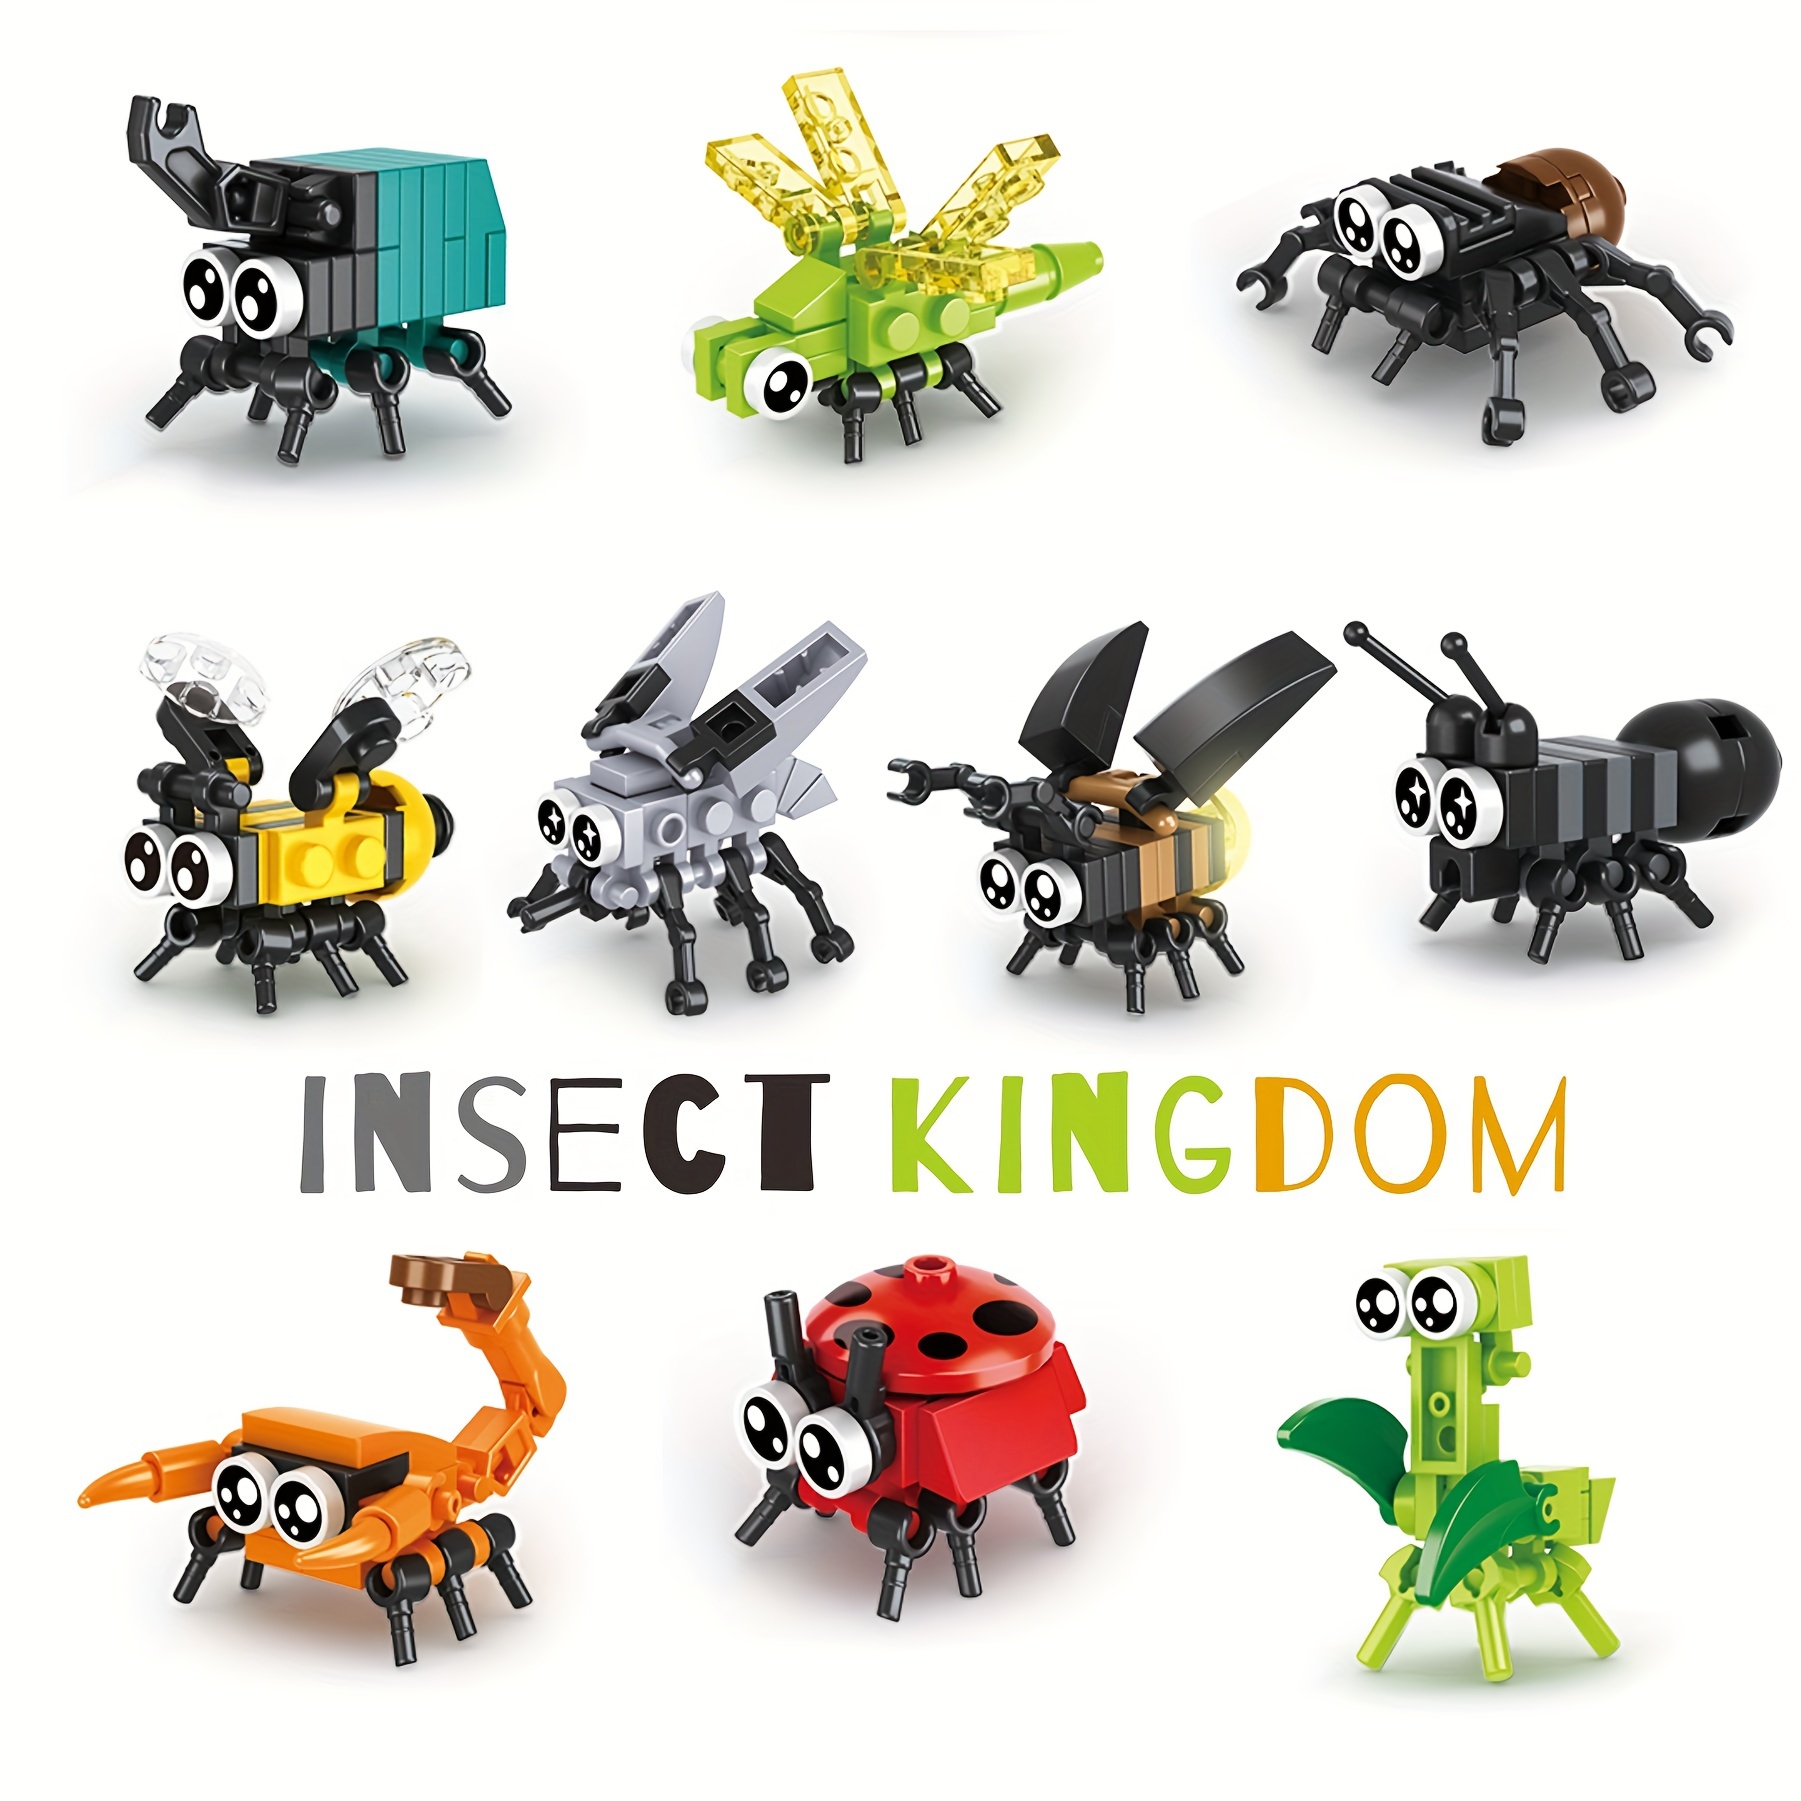 

Insect Building Blocks, Insect Model, Different Little Insects Building Blocks, Bee, Ladybug, Firefly, Dragonfly, Spider Toy For Boy/girl, Children's Toys, Gifts Easter Gift